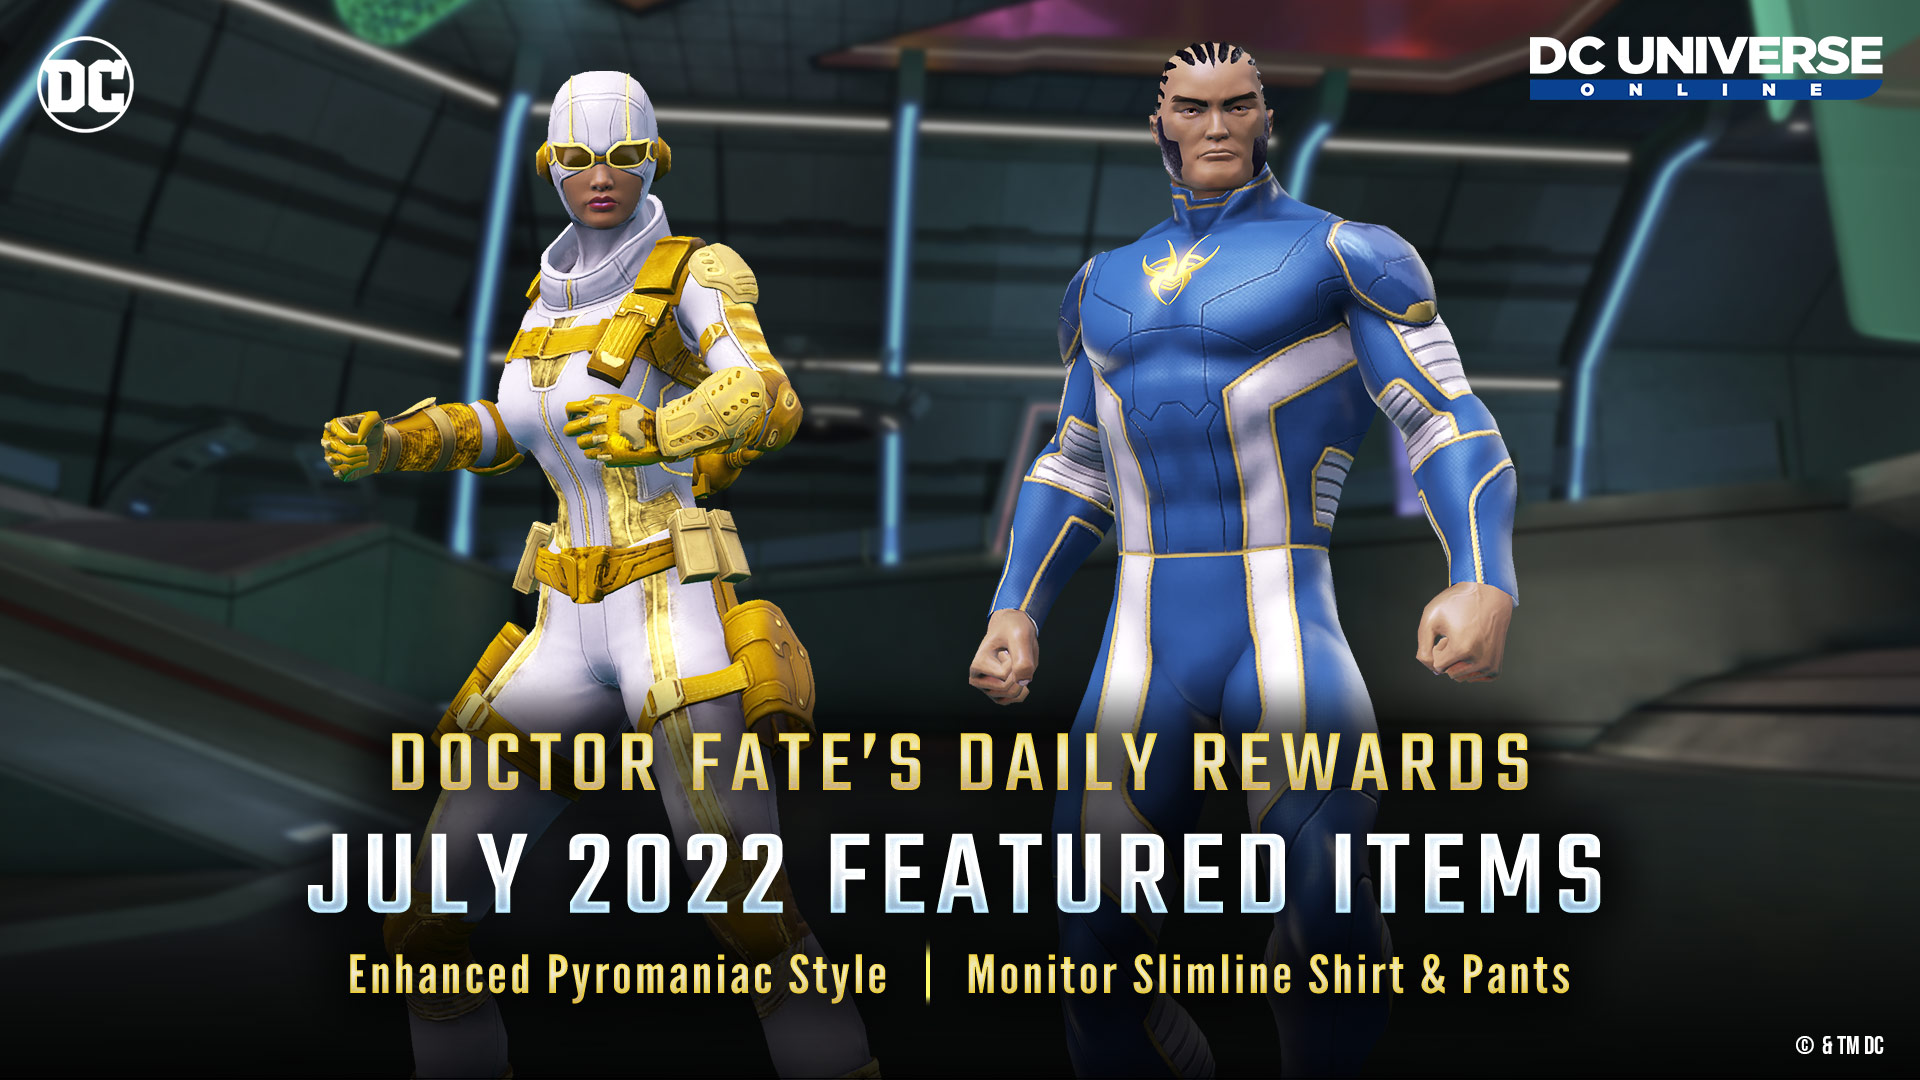 Doctor Fate's Daily Rewards - July 2022